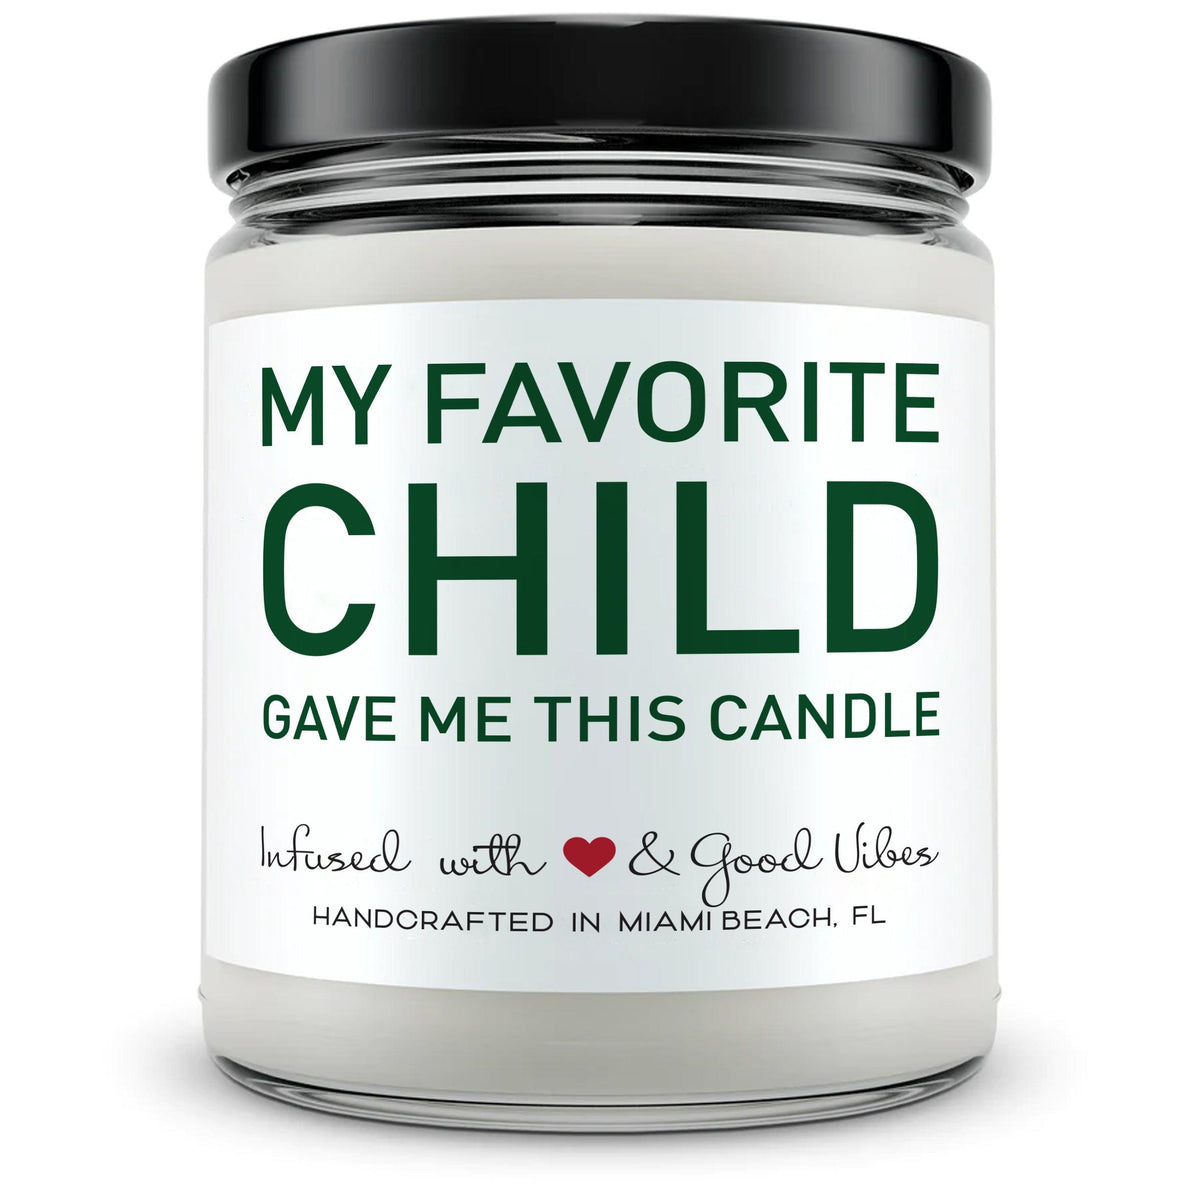 My Favorite Child... - Mint Sugar Candle